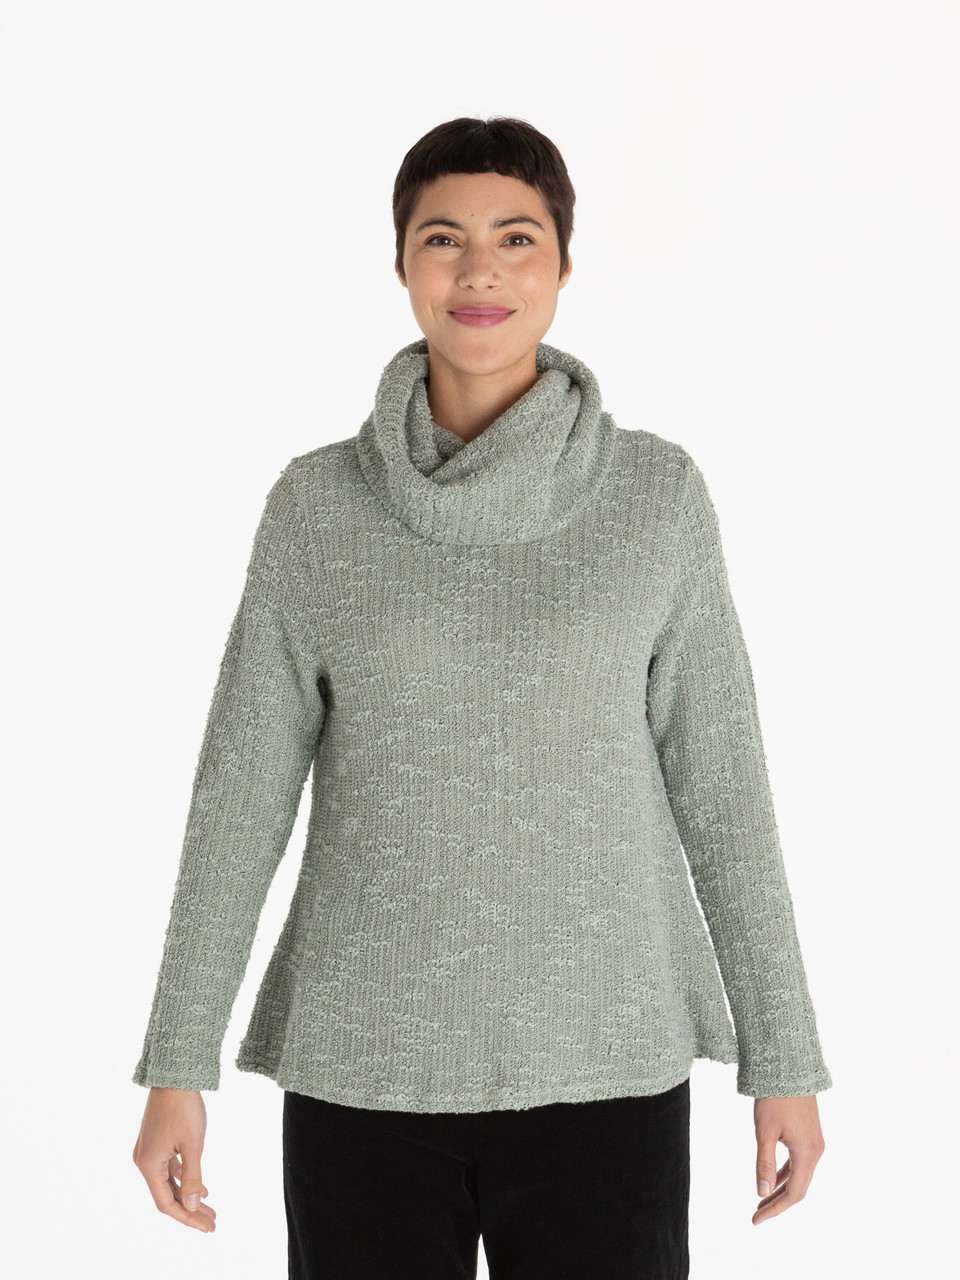 Cut Loose Texture Sweater Cowl Neck Pullover